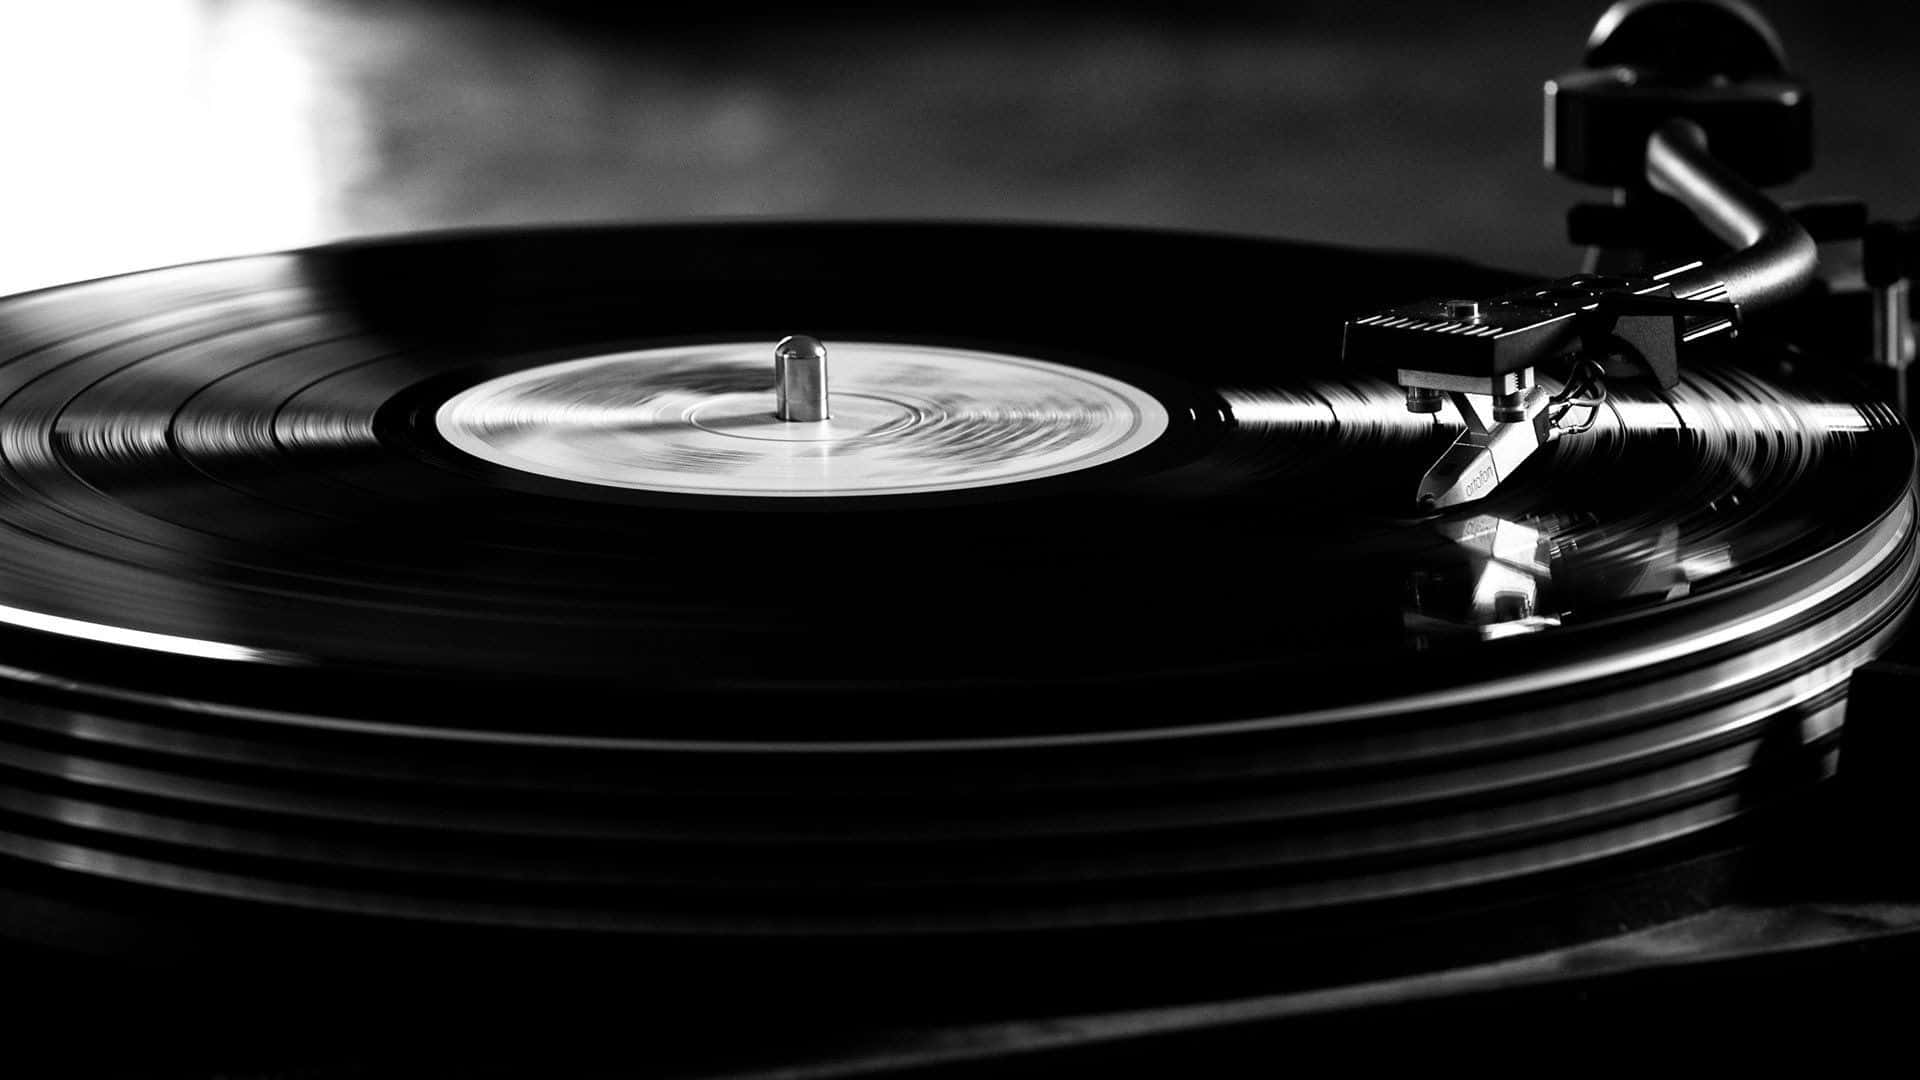 Vinyl Record Being Played On A Turntable Wallpaper